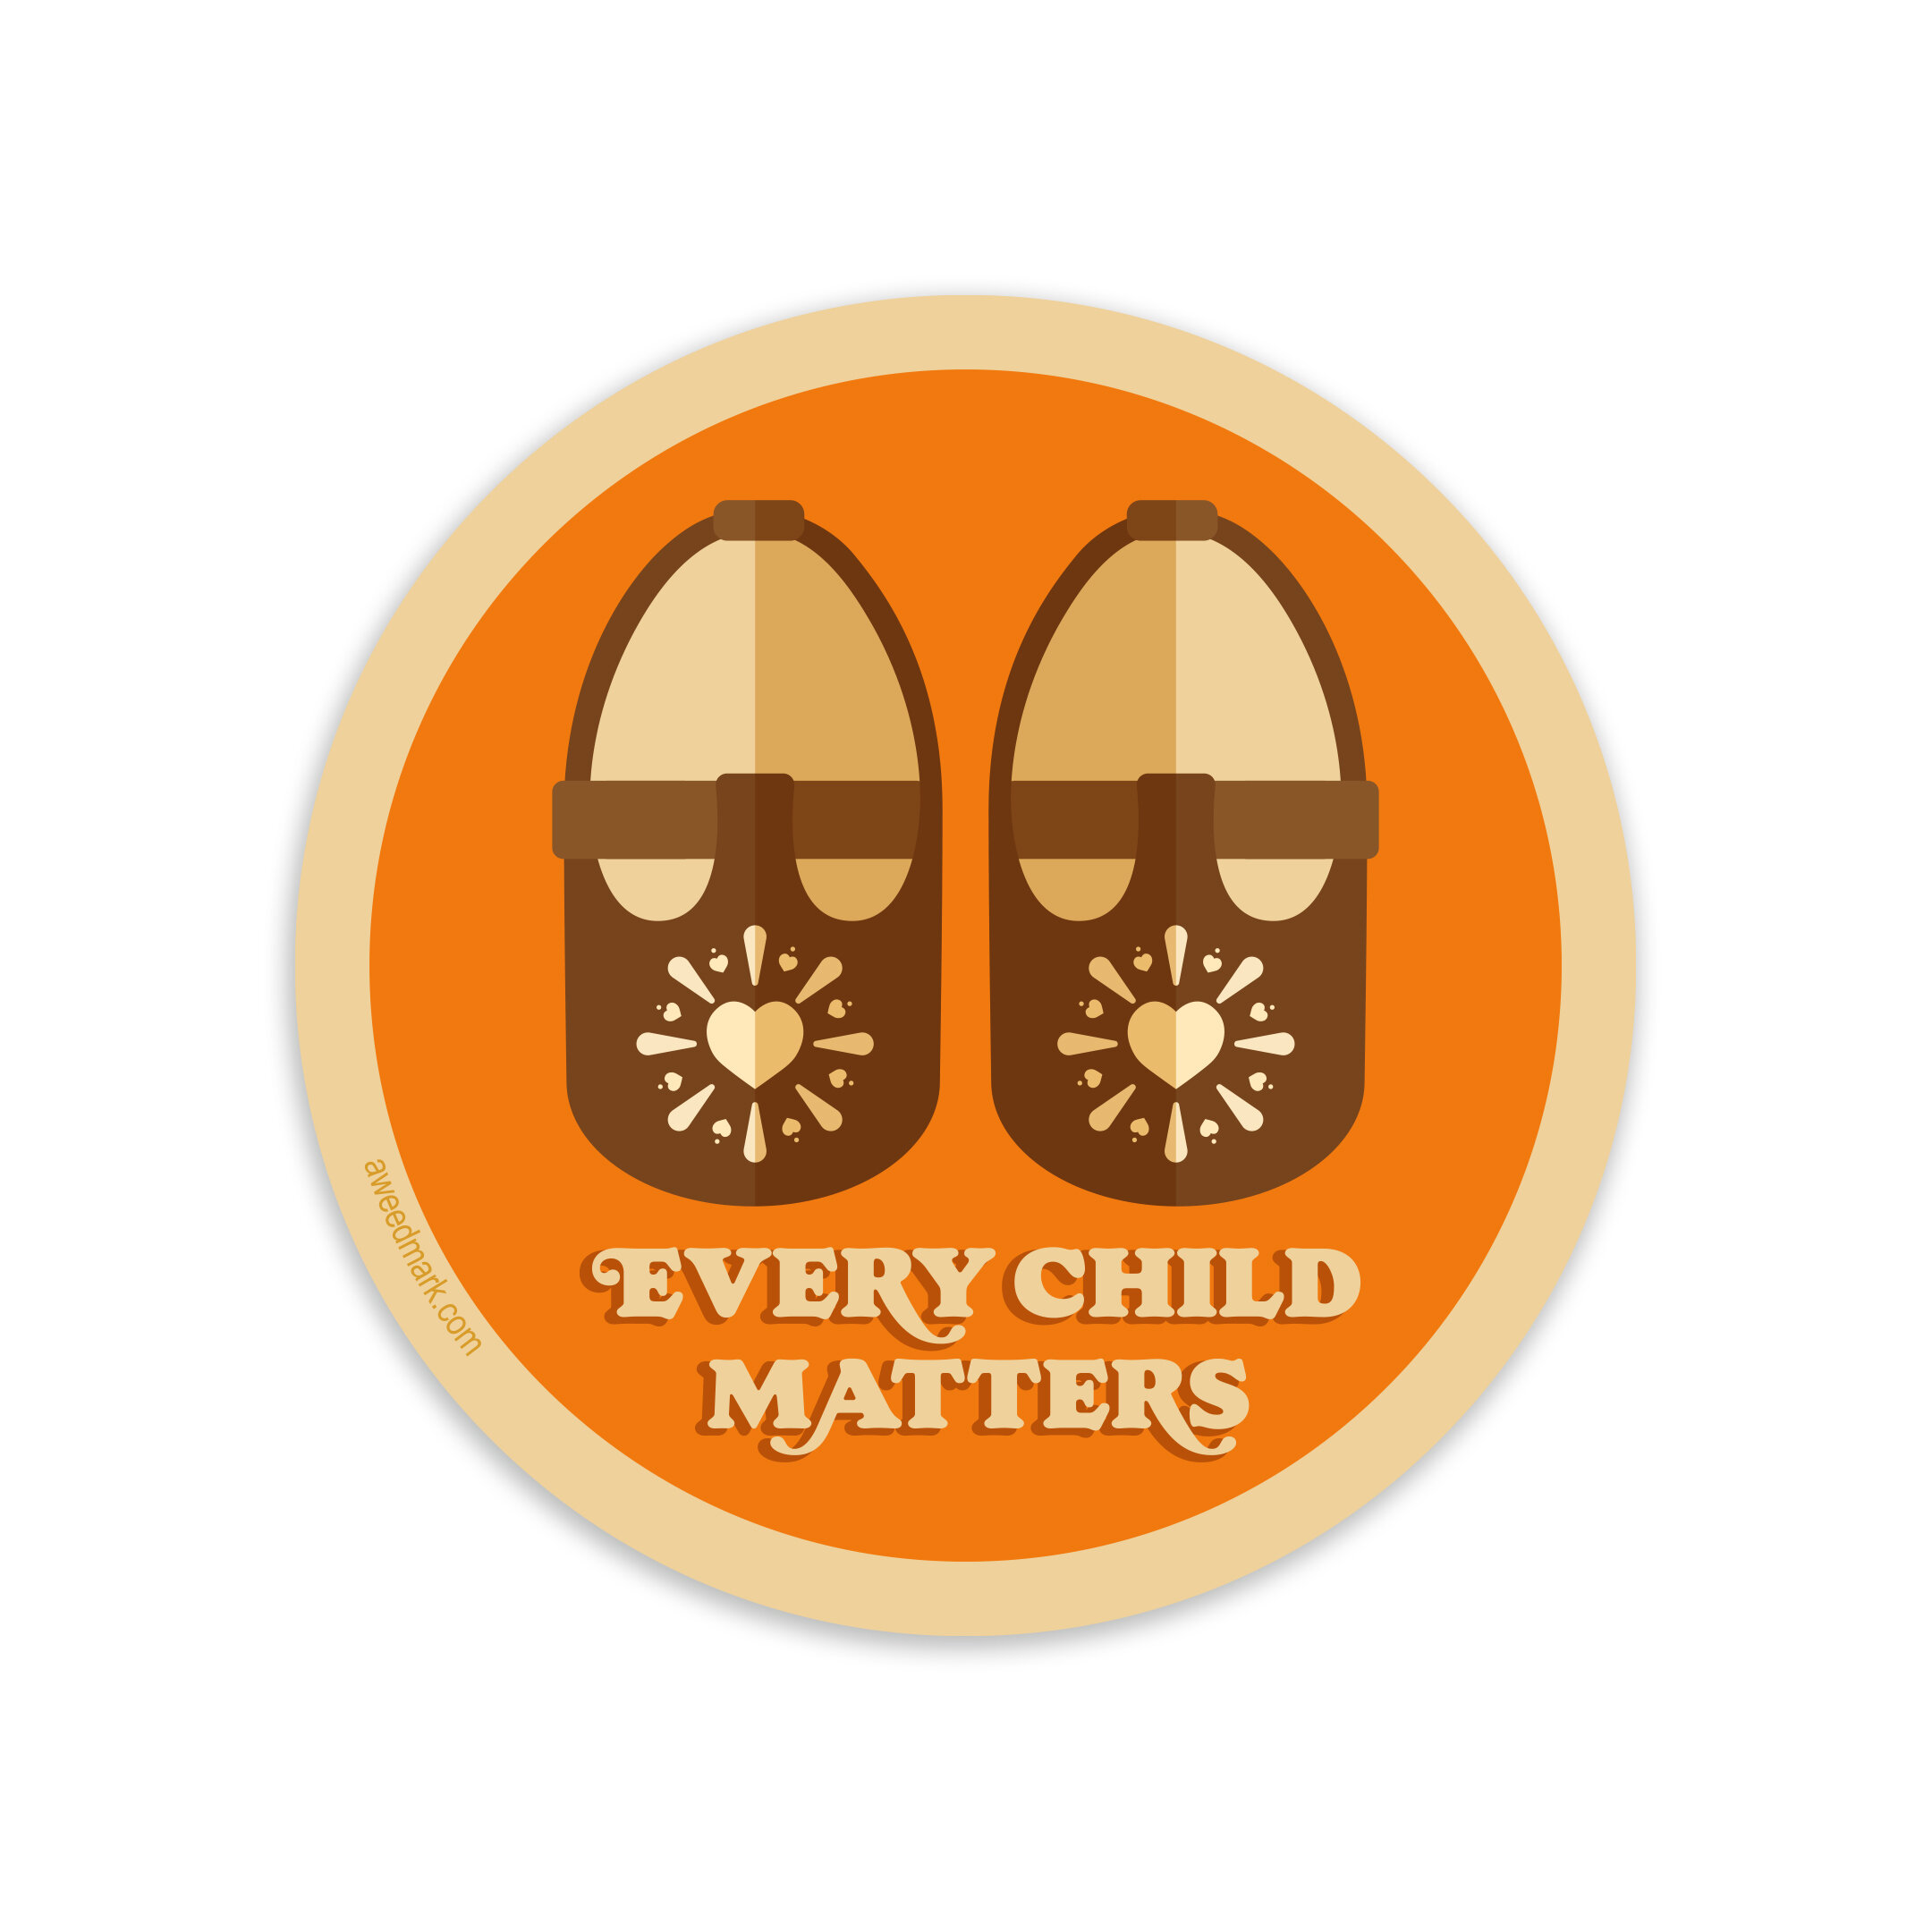 Every child matters v1 Shirt Ship From Canada